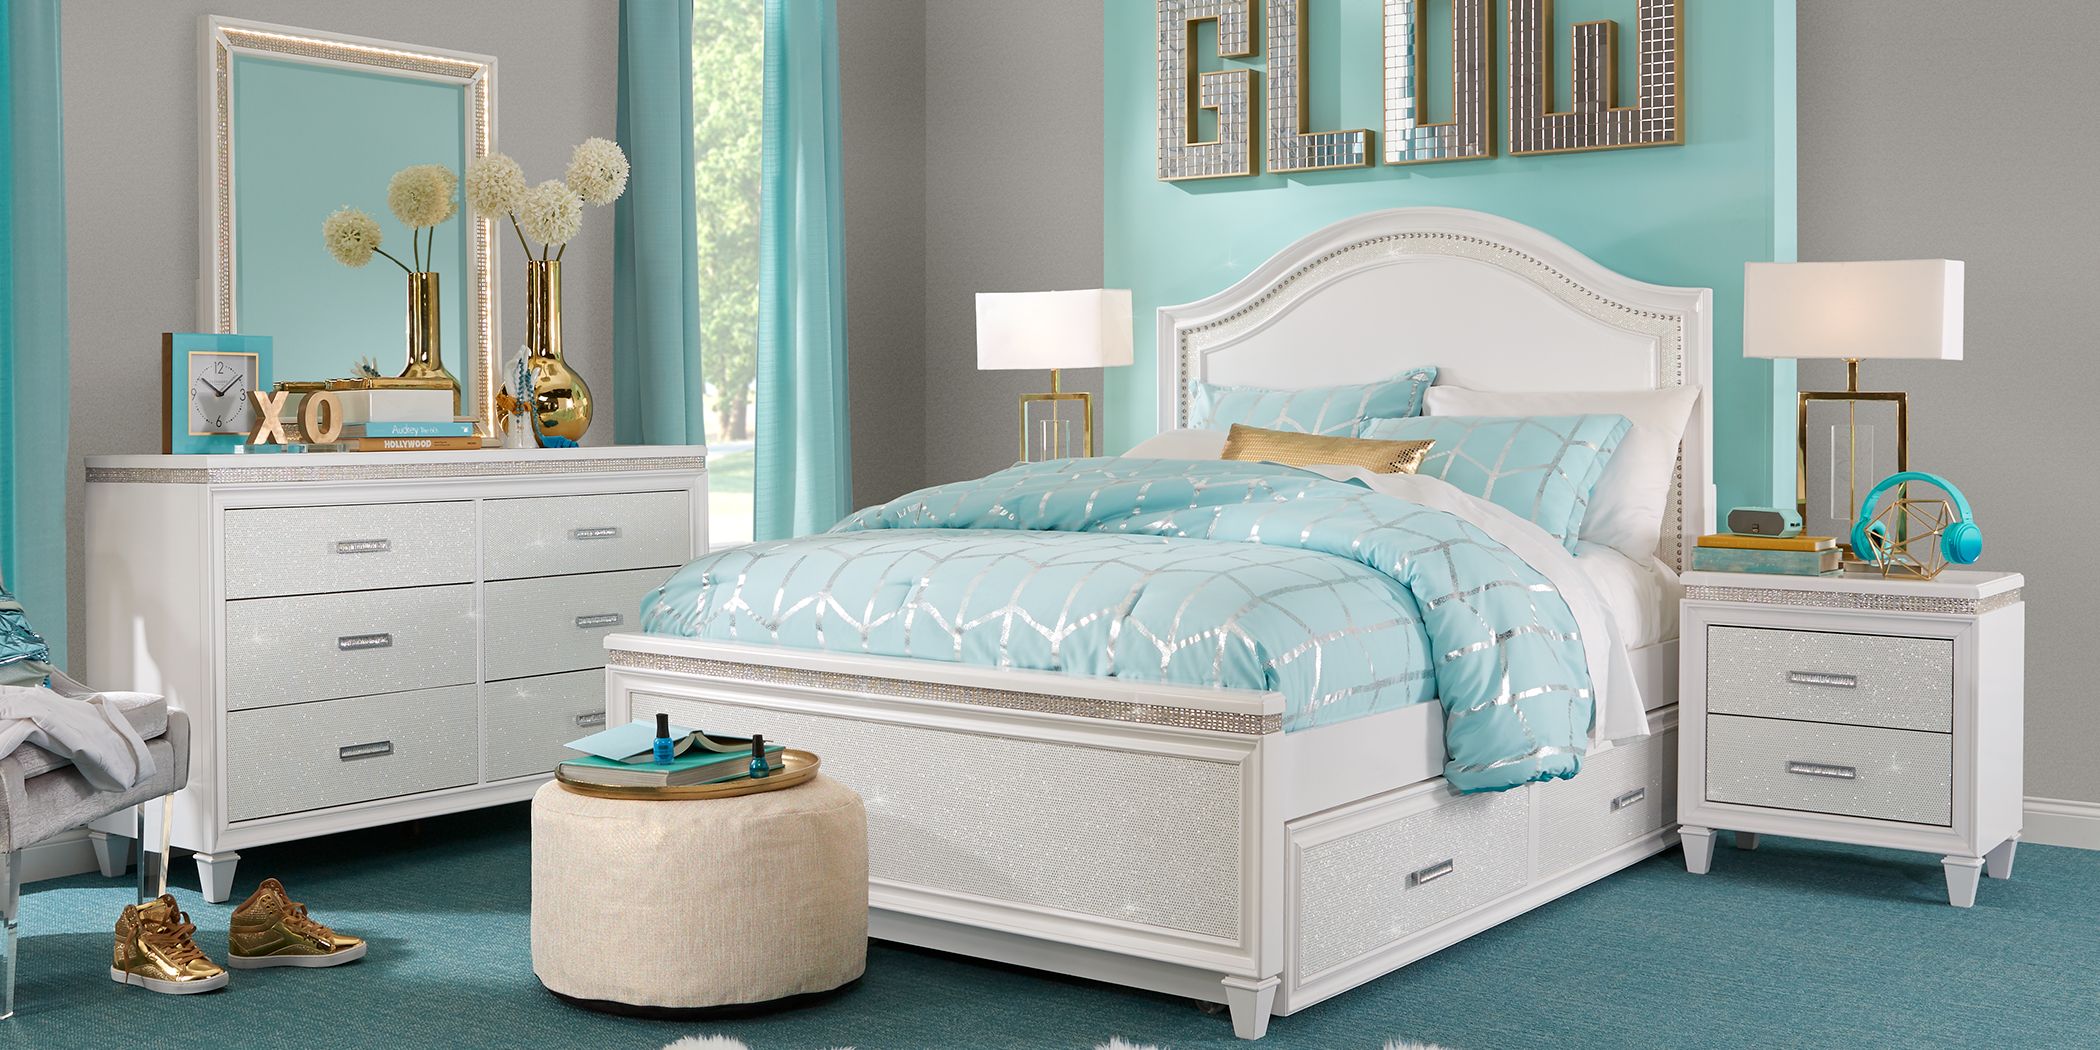 Girls Twin Size Bedroom Furniture Set, Twin Bed Collections